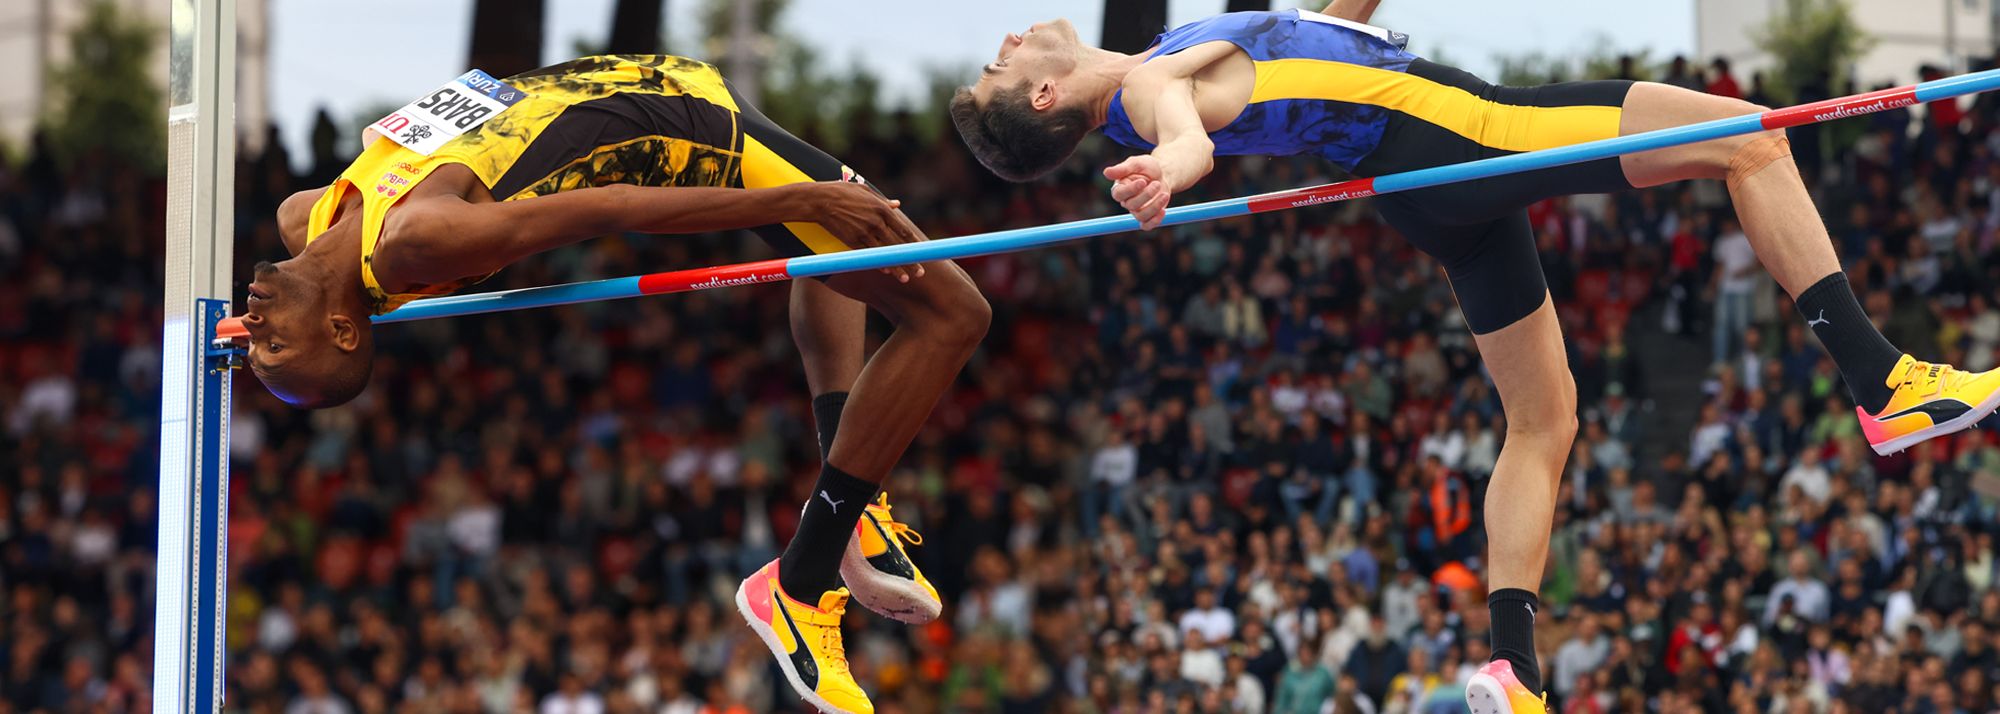 Olympic champion Mutaz Barshim will go up against world indoor champion Hamish Kerr in a high jump clash in Suzhou on 27 May